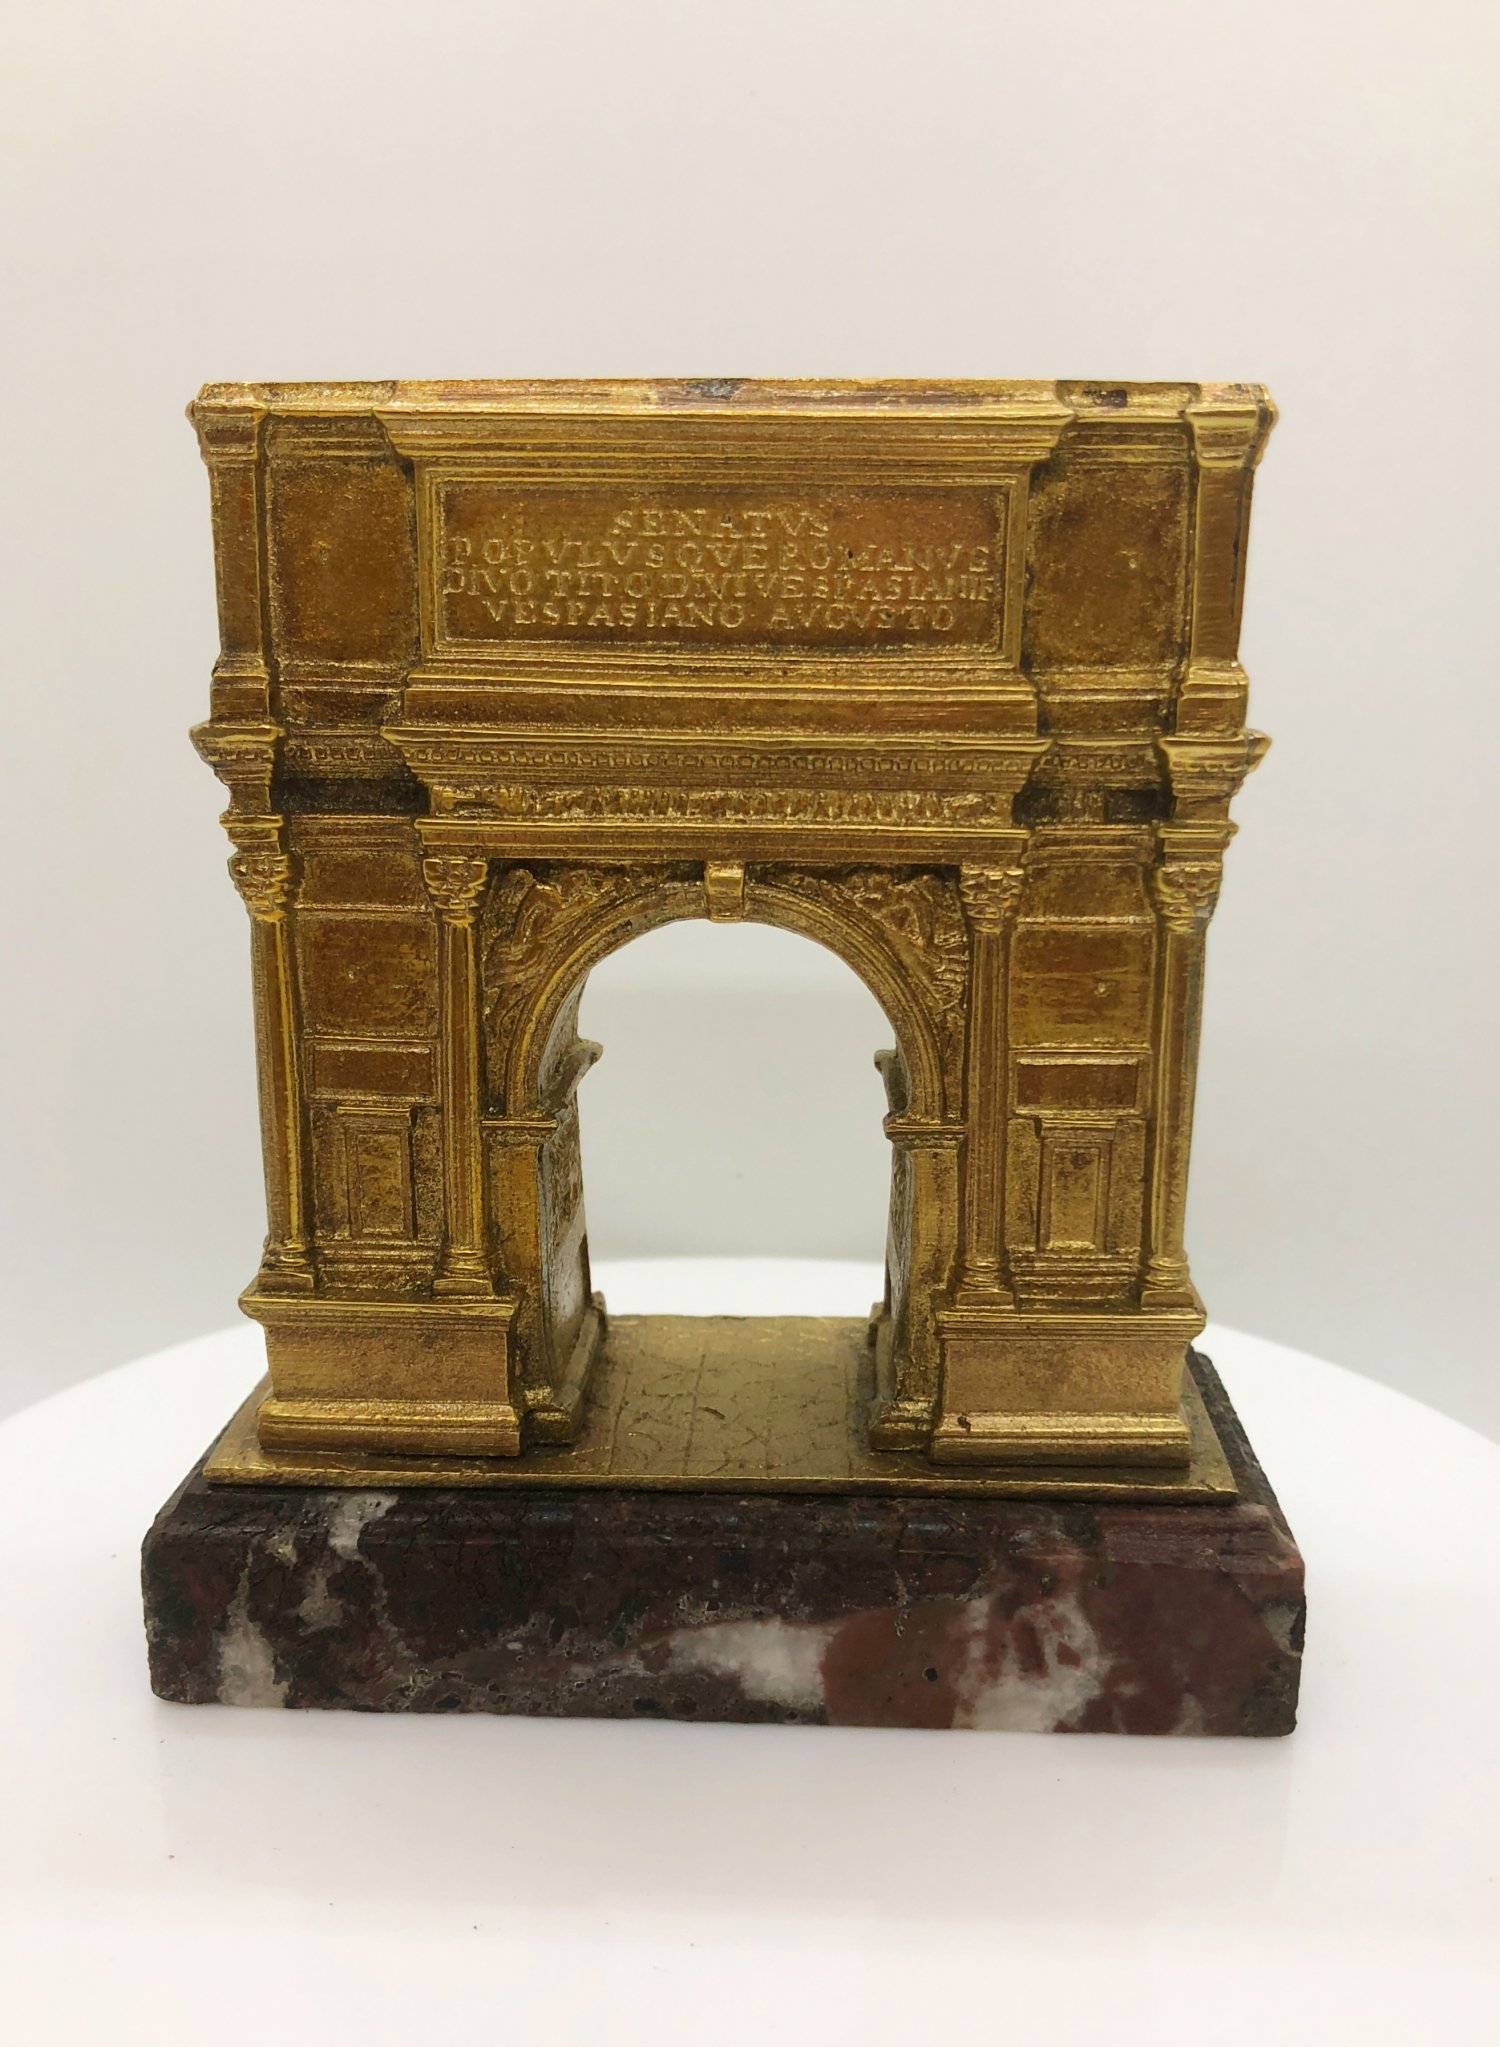 A late 19th century brass and marble model of the Arch of Titus in Rome